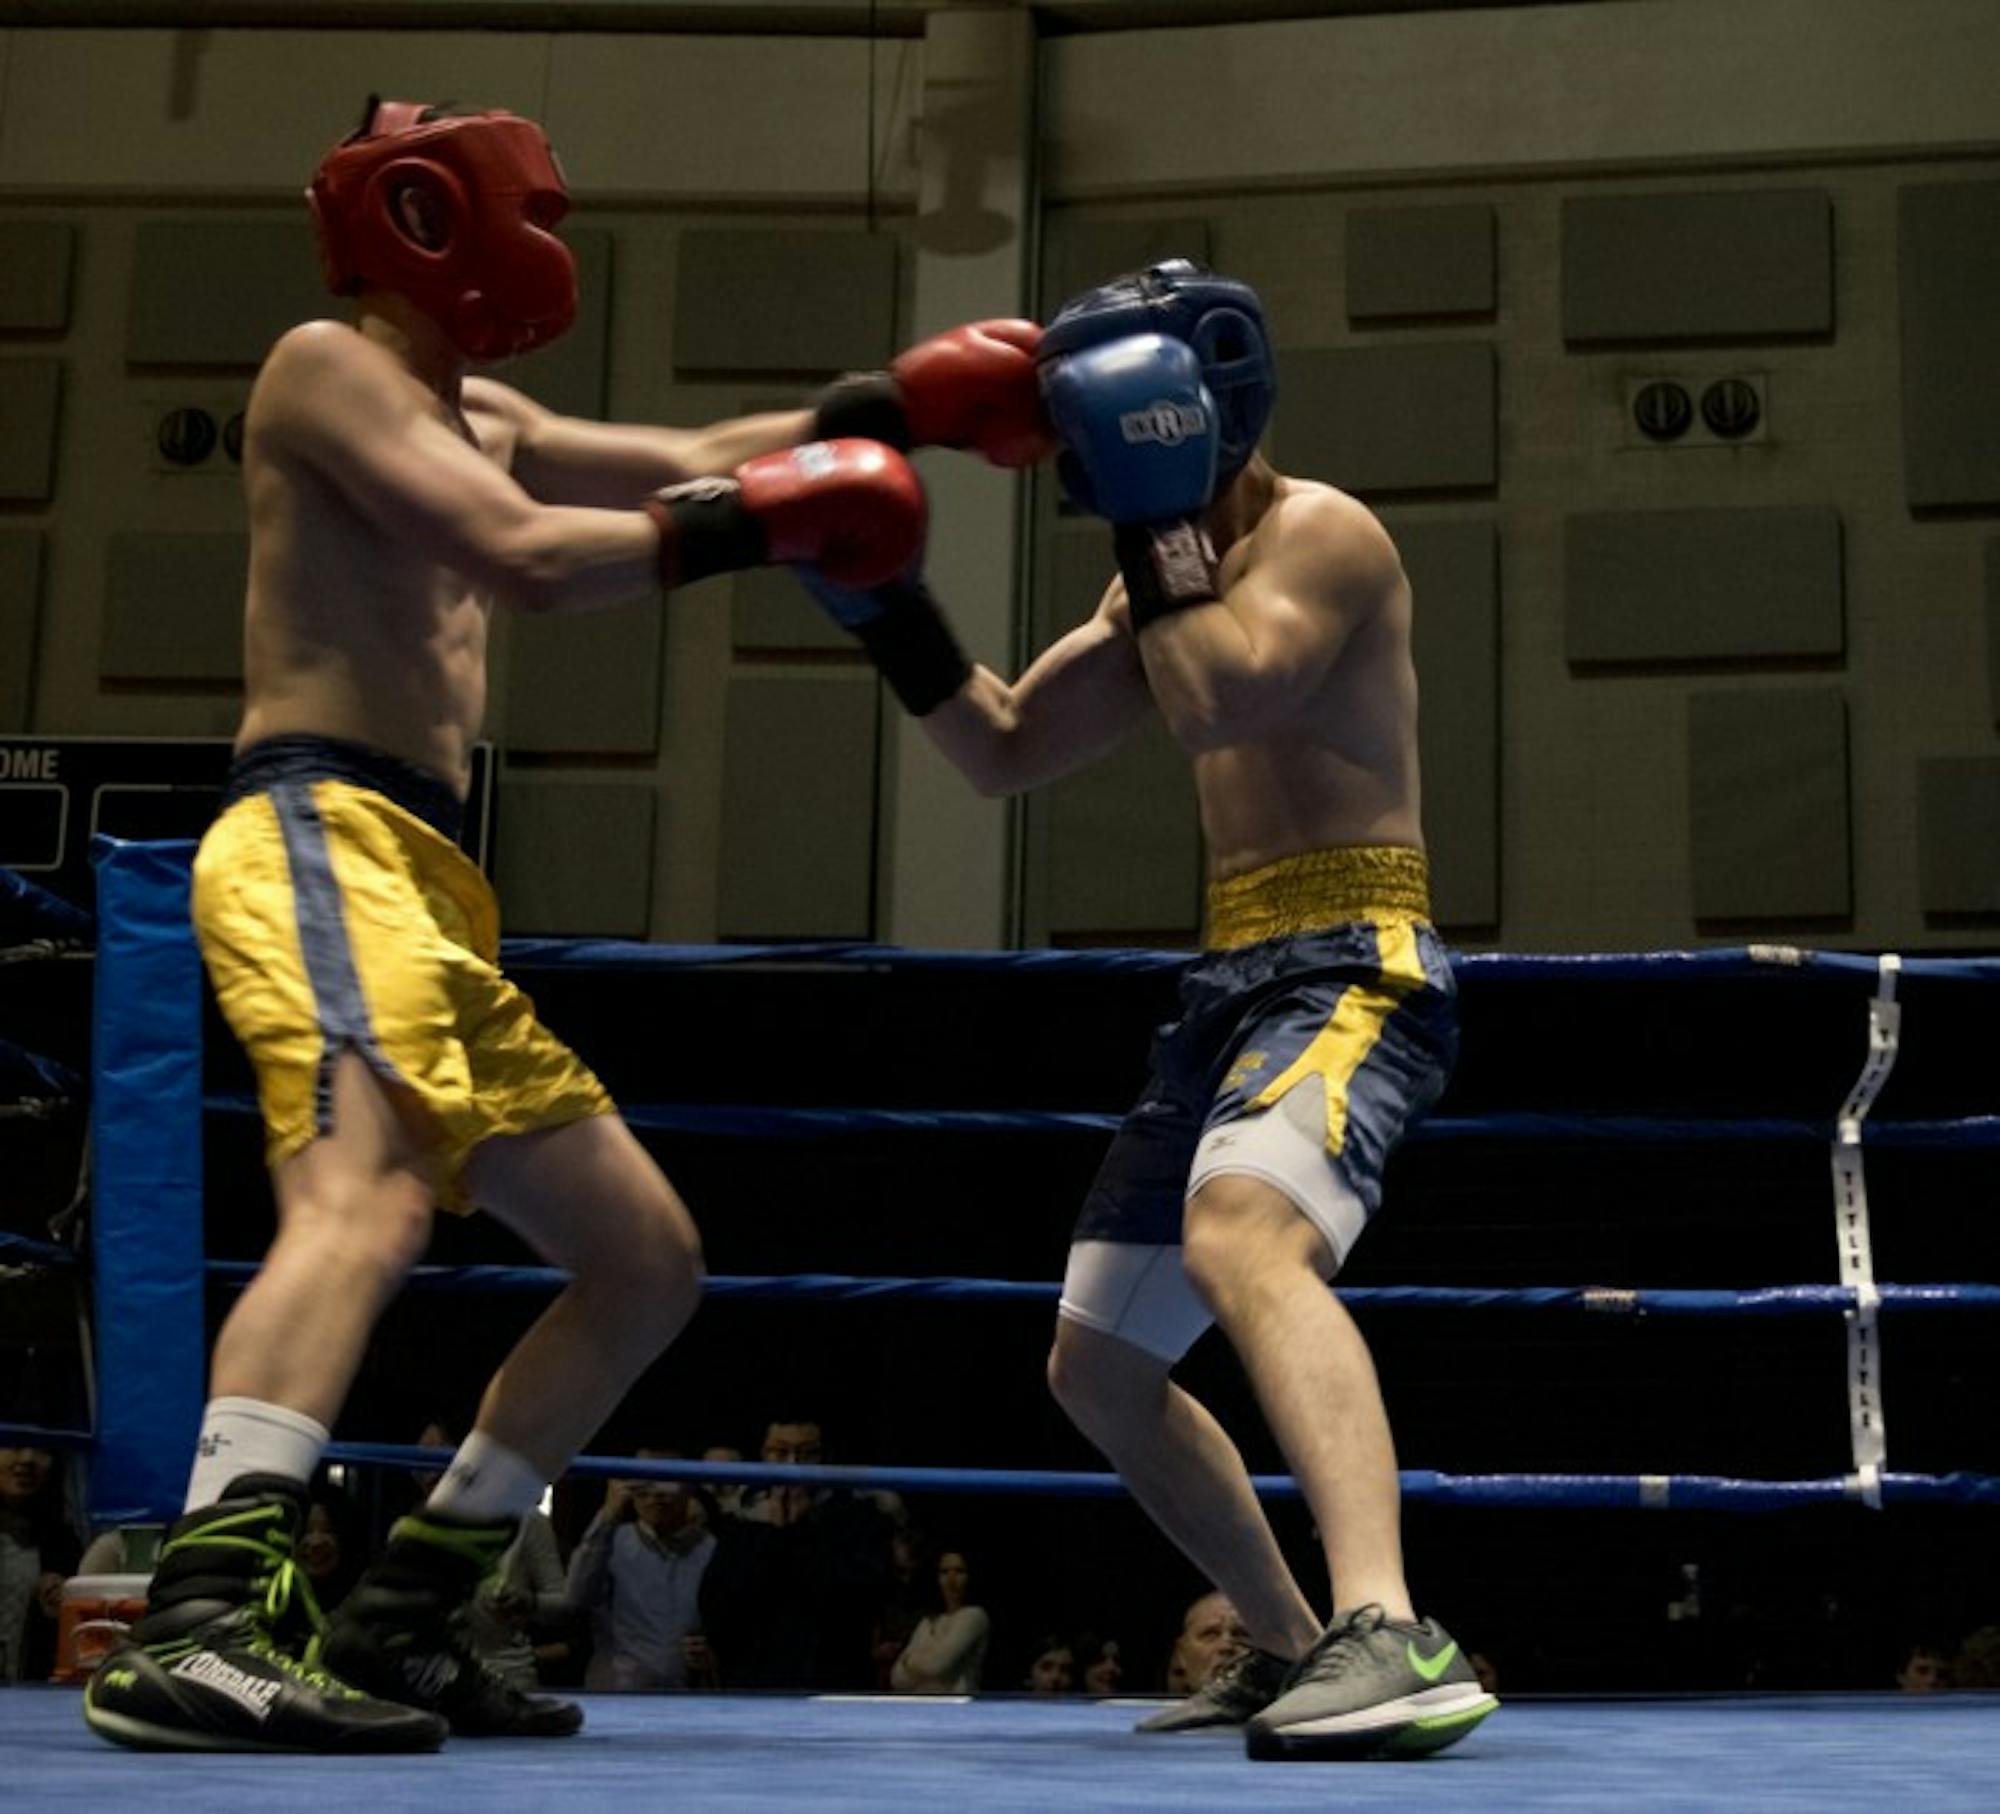 Senior Liam “Trooper” Chan, gold, lands a shot to the head of graduate student Qinfeng Wu during Bengal Bouts action Sunday at the JACC.